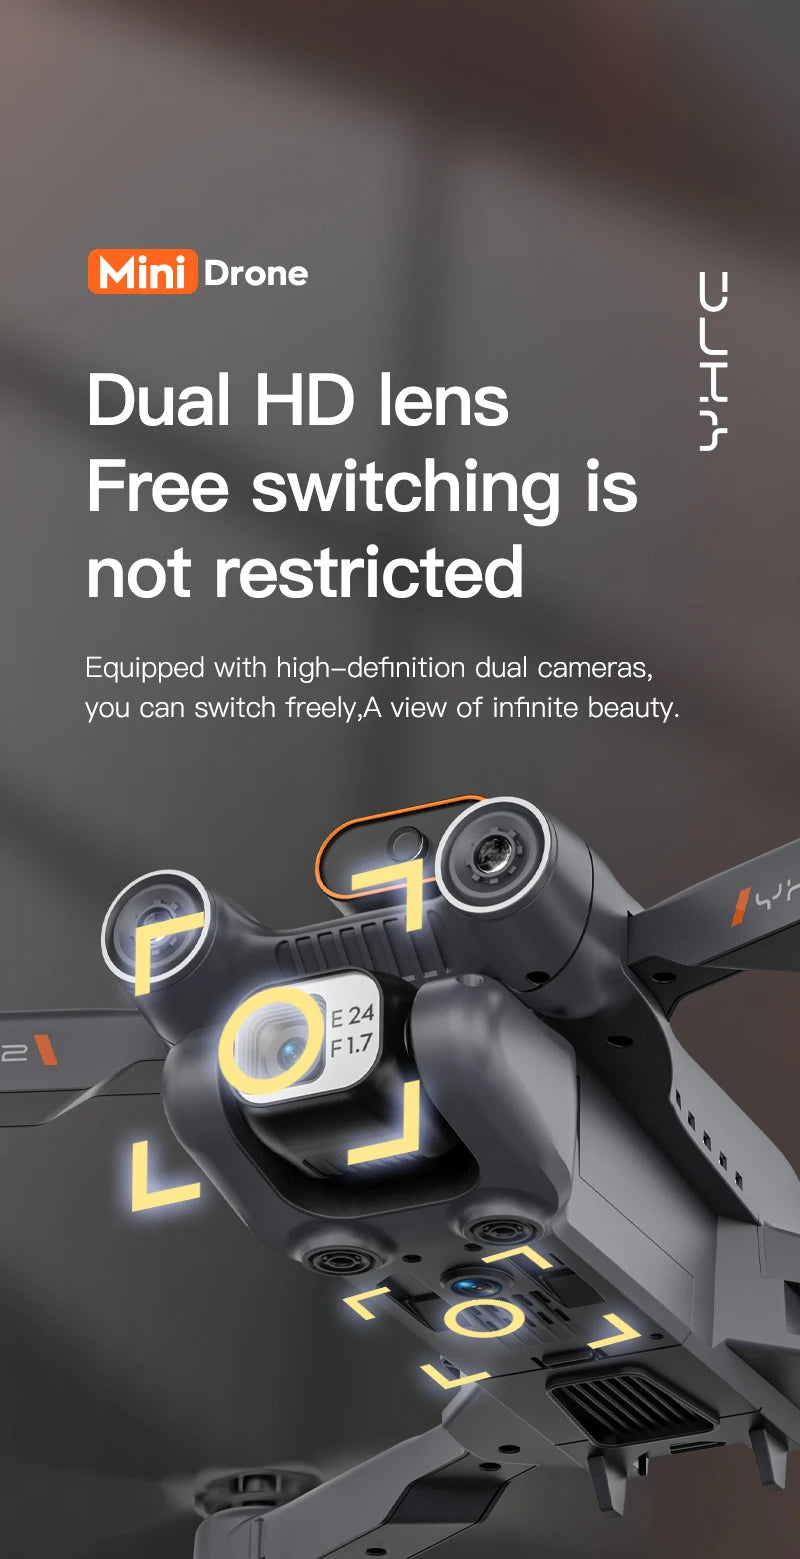 P12 Drone, mini drone dual hd lens  free switching is not restricted